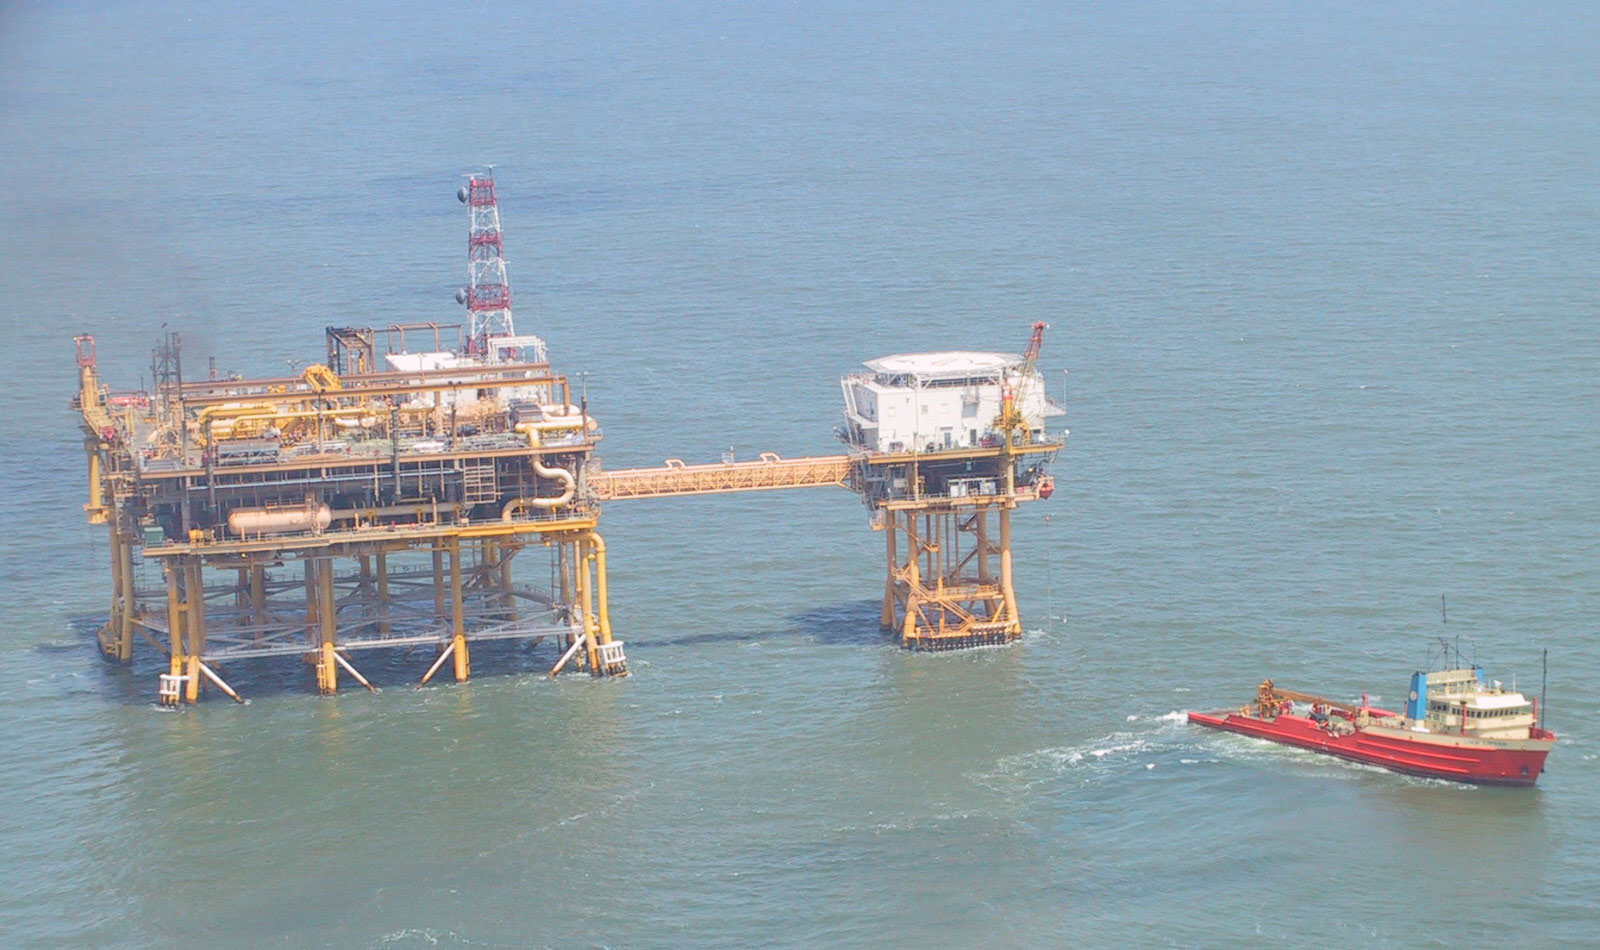 Photograph of the Louisiana Offshore Oil Port (LOOP) offshore pumping platform, a platform on stilts to lift it above the water. A ship is in the water nearby.